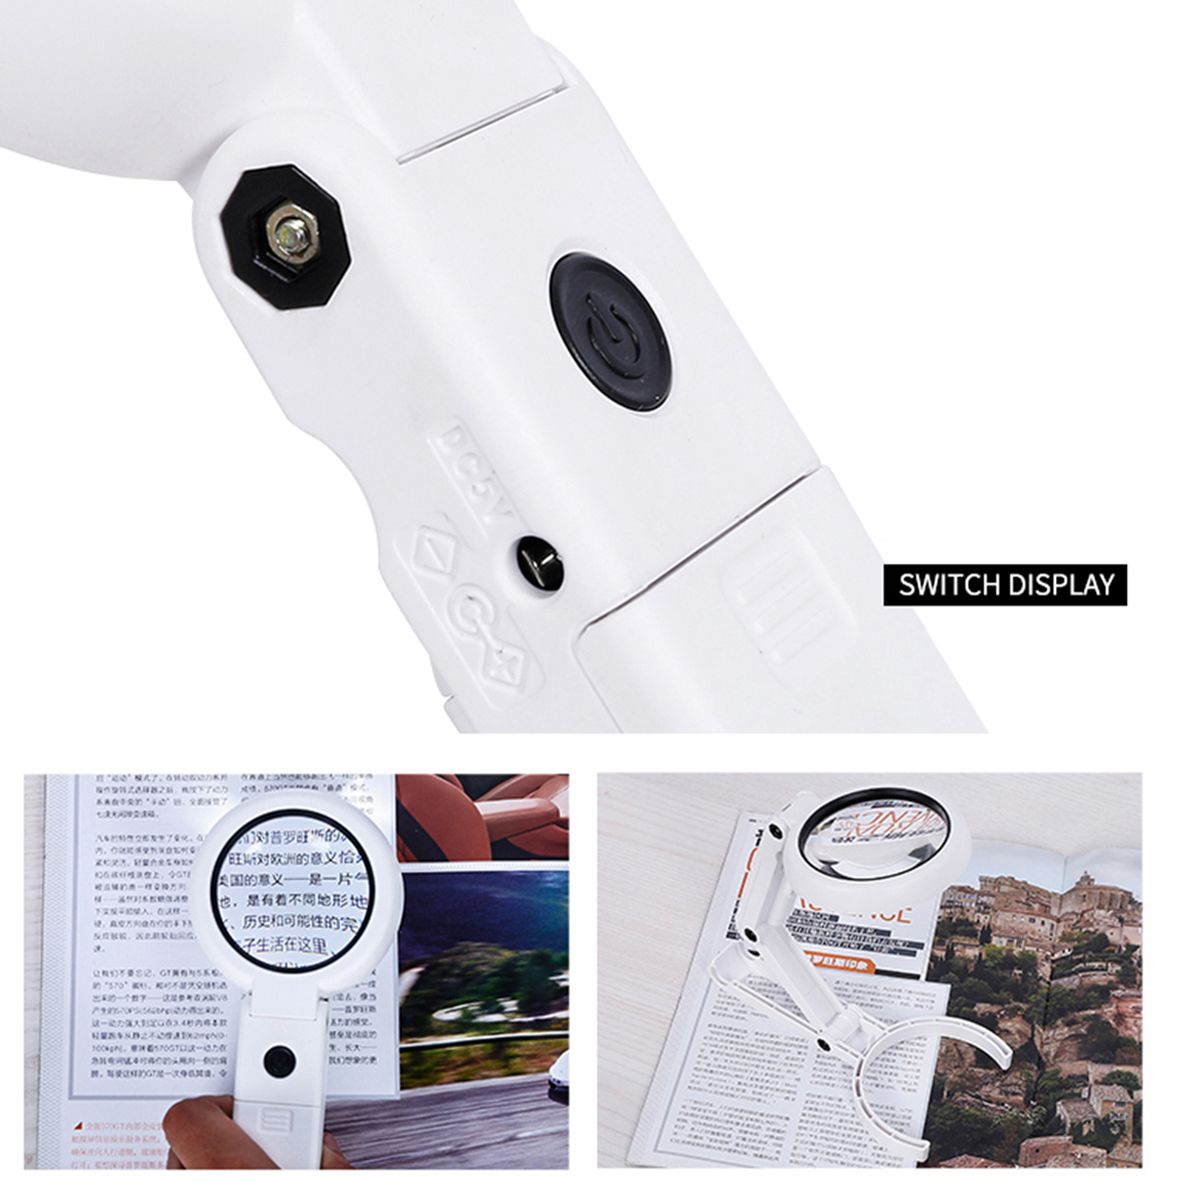 Handheld-Portable-Foldable-Lamp-Illuminated-Magnifier-5X-11X-Magnifying-Table-8-LED-Lights-Loupe-Mag-1472829